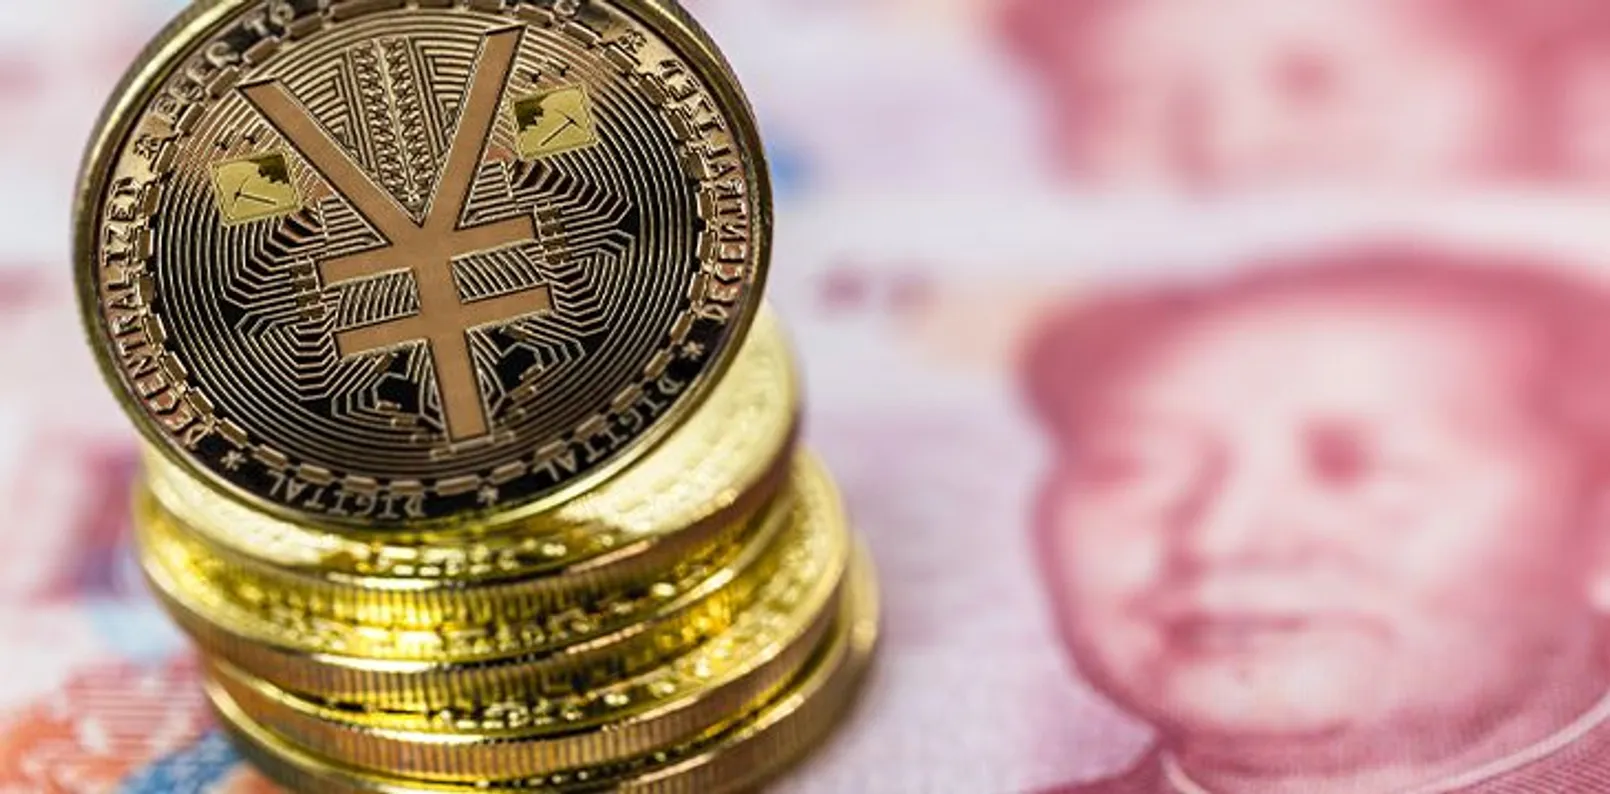 Chinas Digital Yuan Will Be Private but Not Anonymous Cbdc Lead 1.jpg